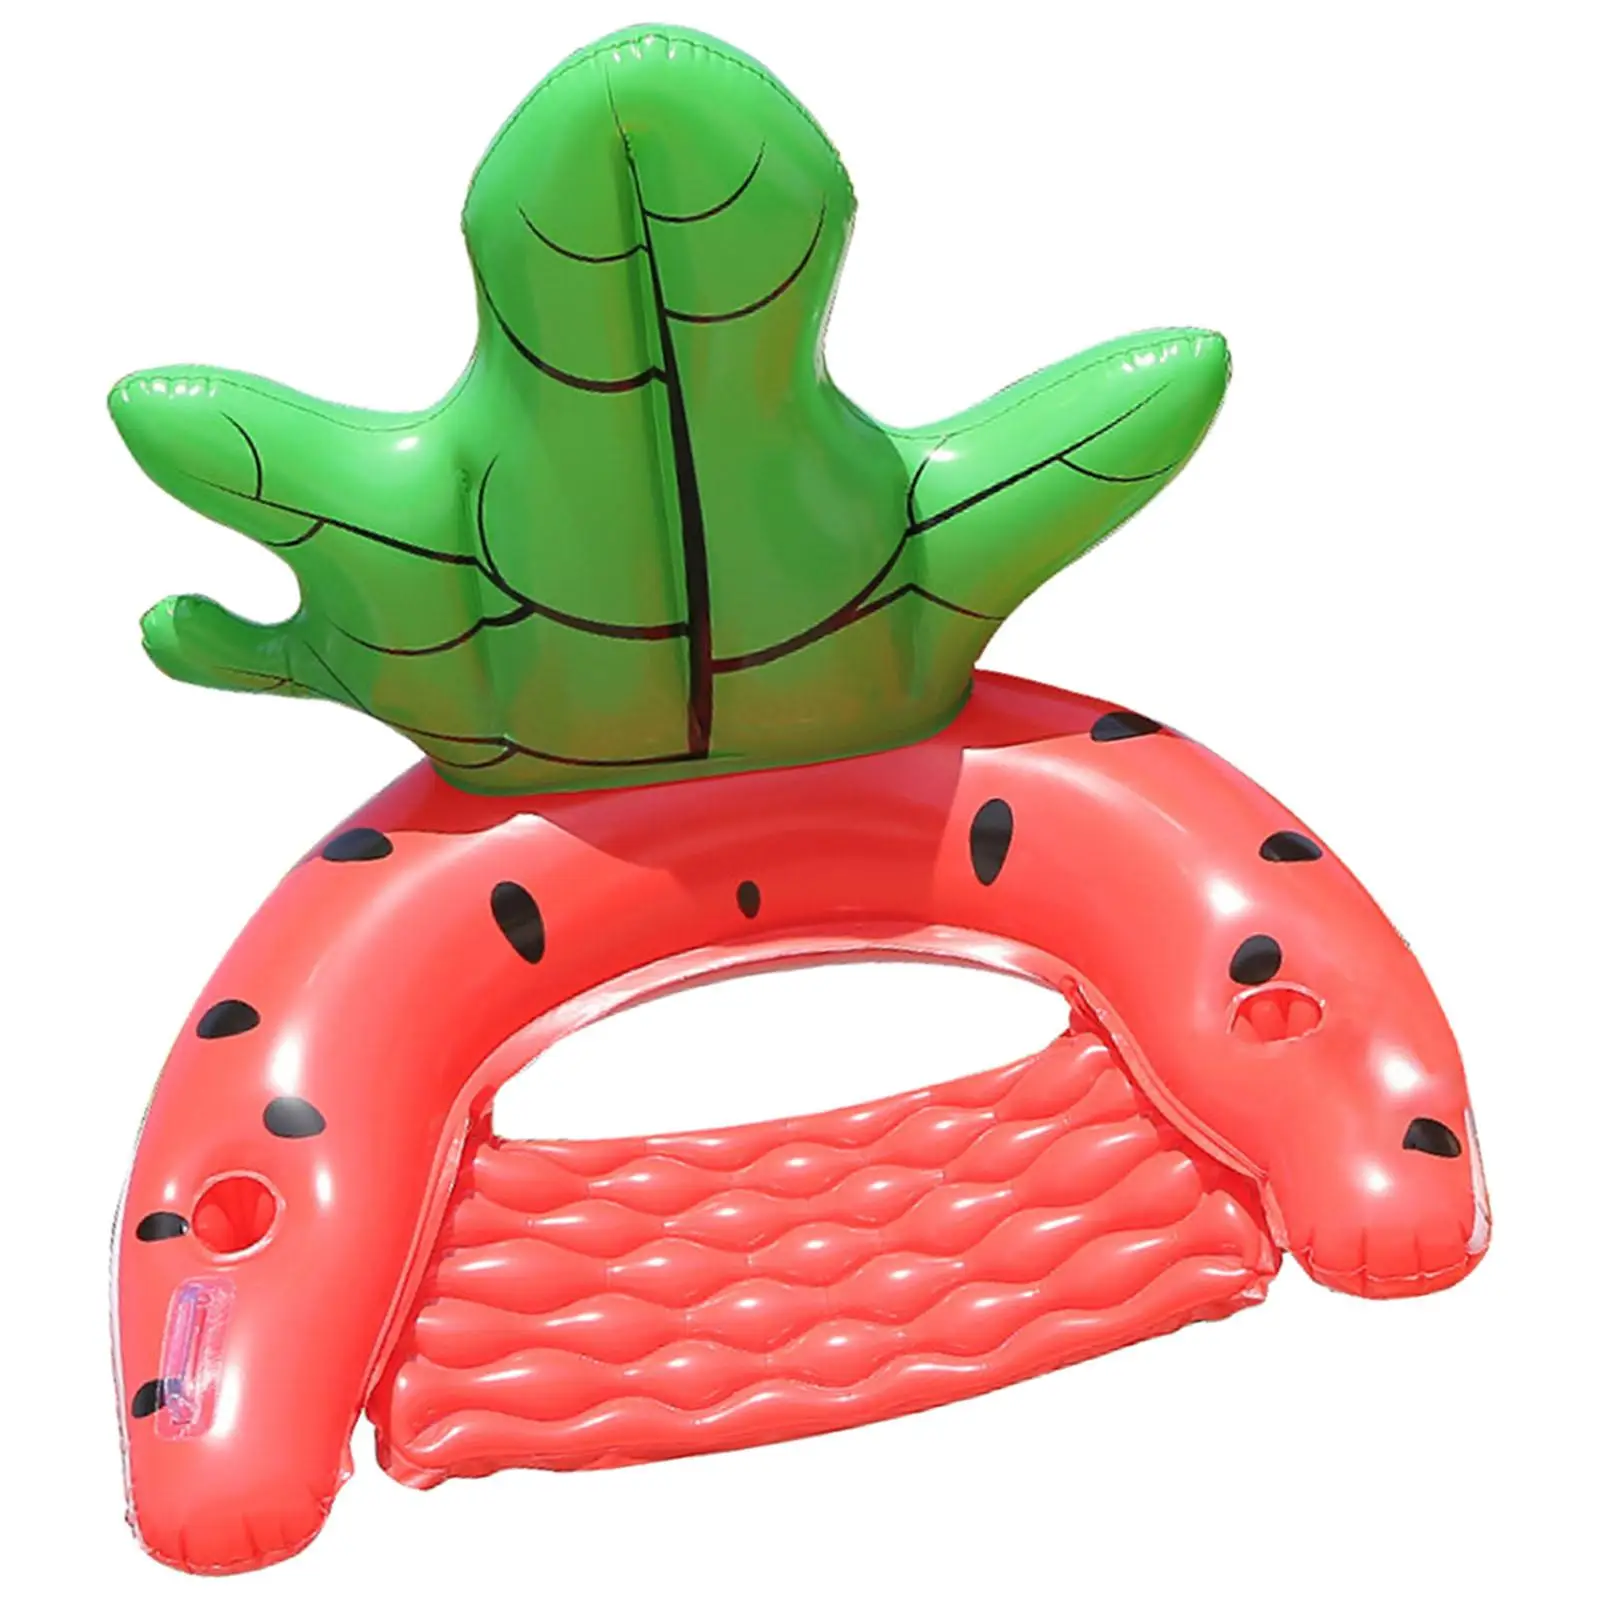 Watermelon Inflatable Pool Float, Water Hammock Float with Handles Water Mattress Mat Lake Raft for Kids Adult